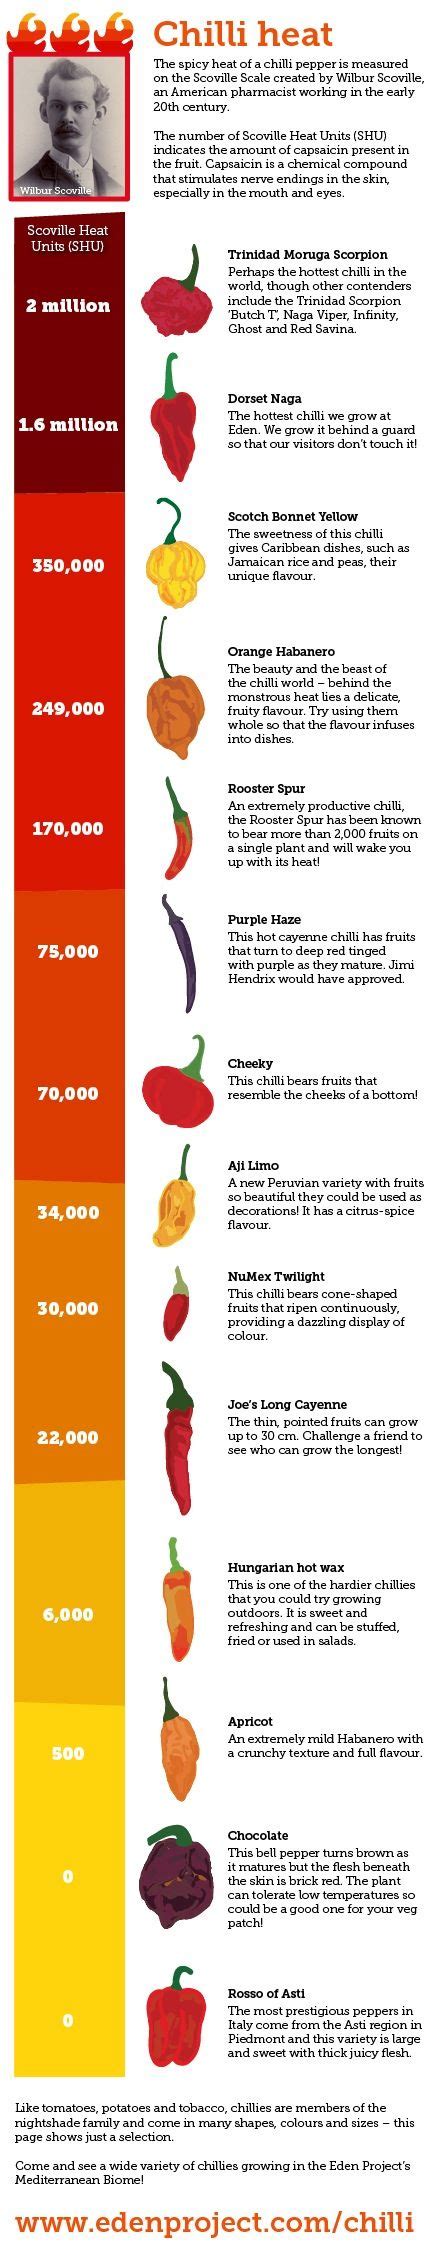 Chilli Scoville Scale Infographic 4352 255 Pixels Hot Spicy